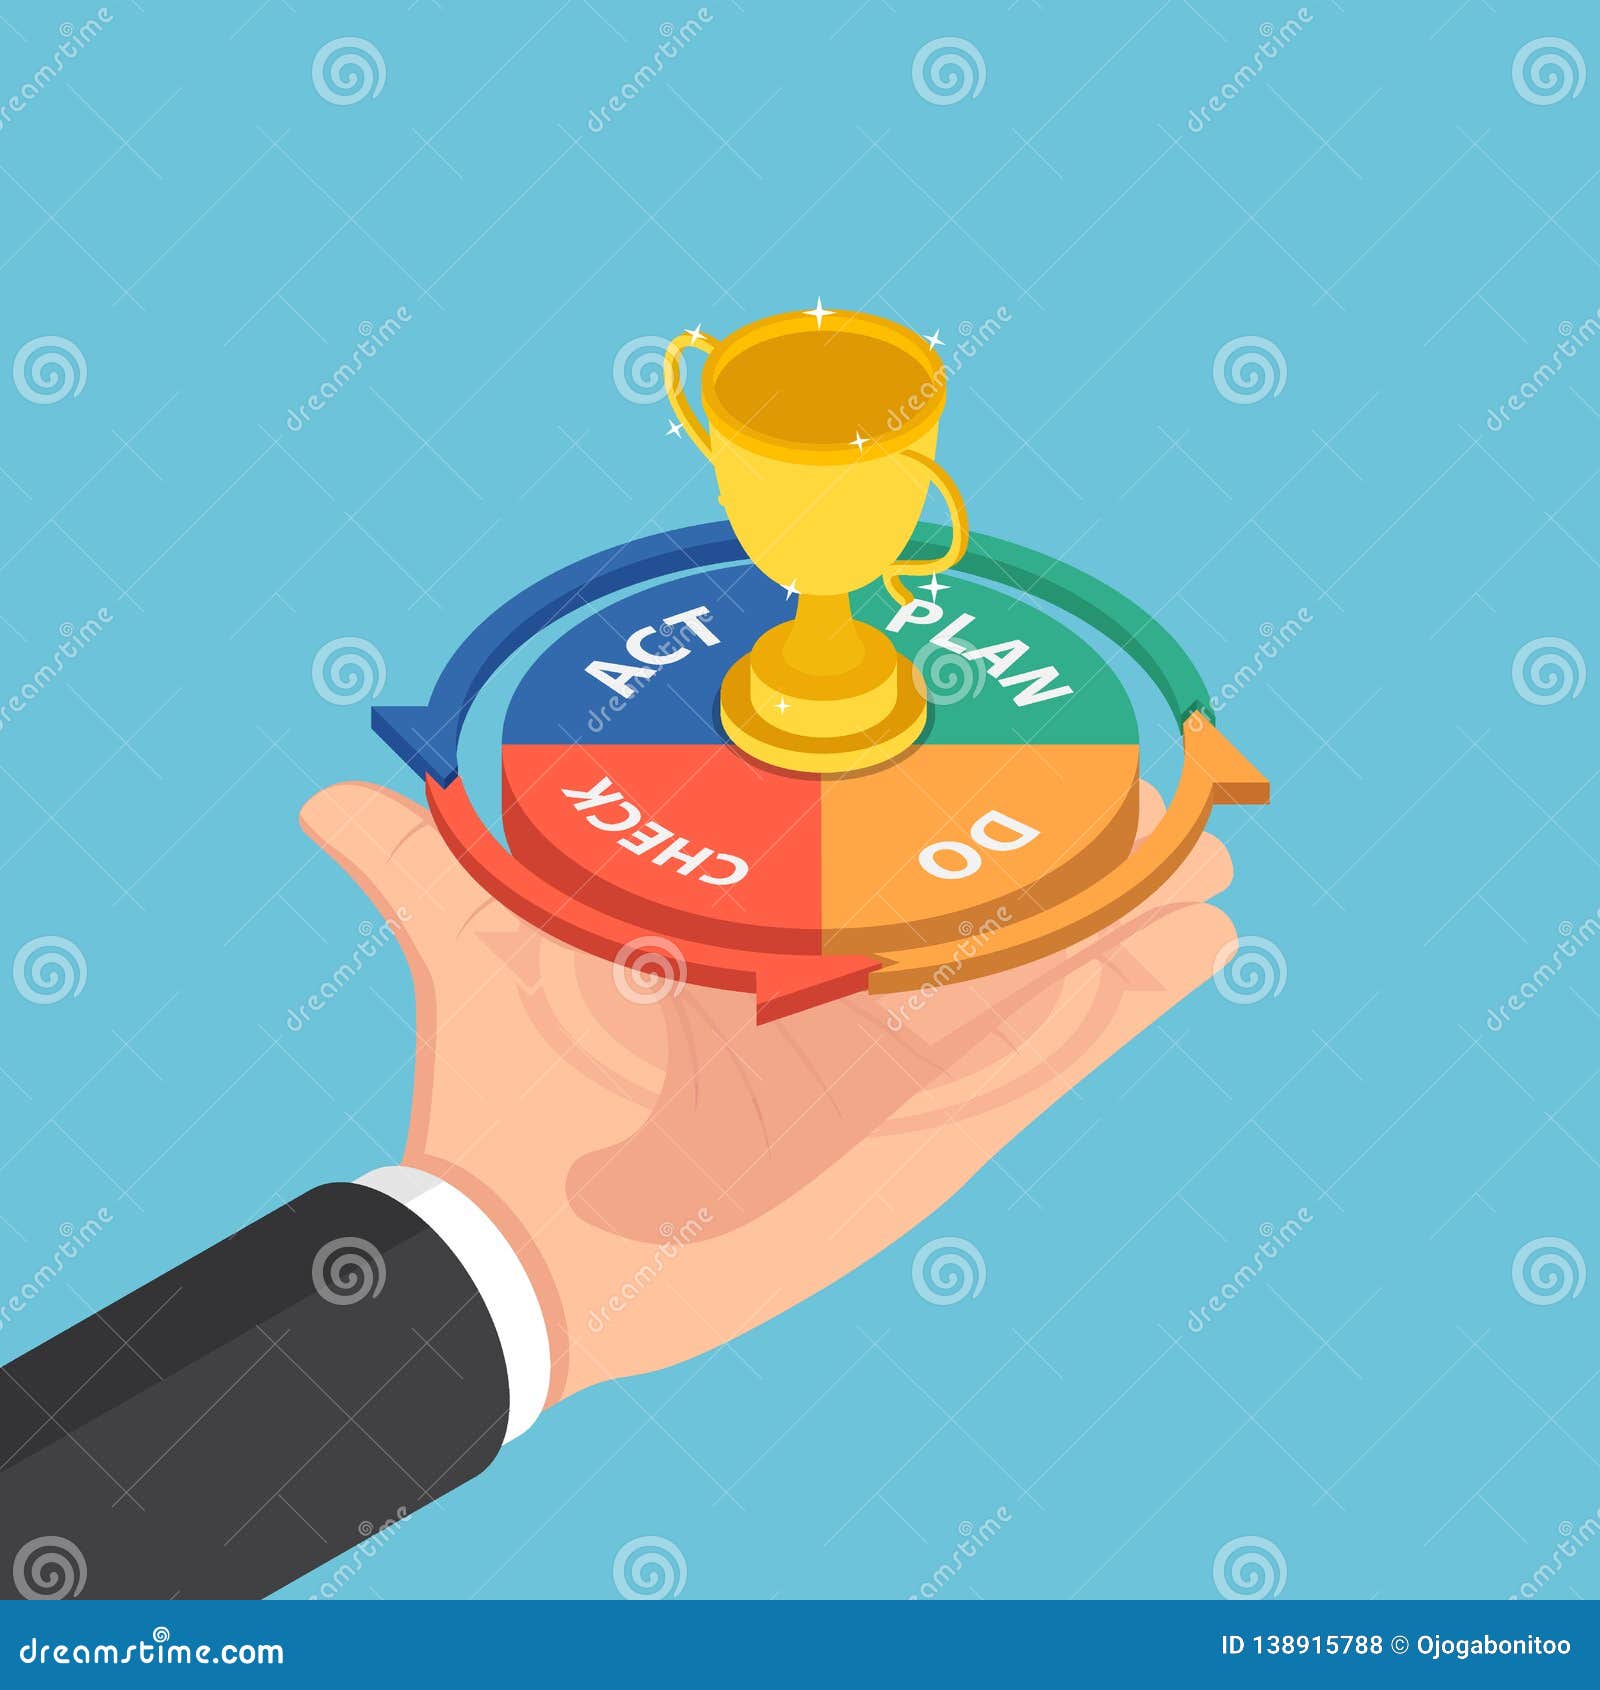 isometric businessman hand holding plan do check act cycle with success trophy